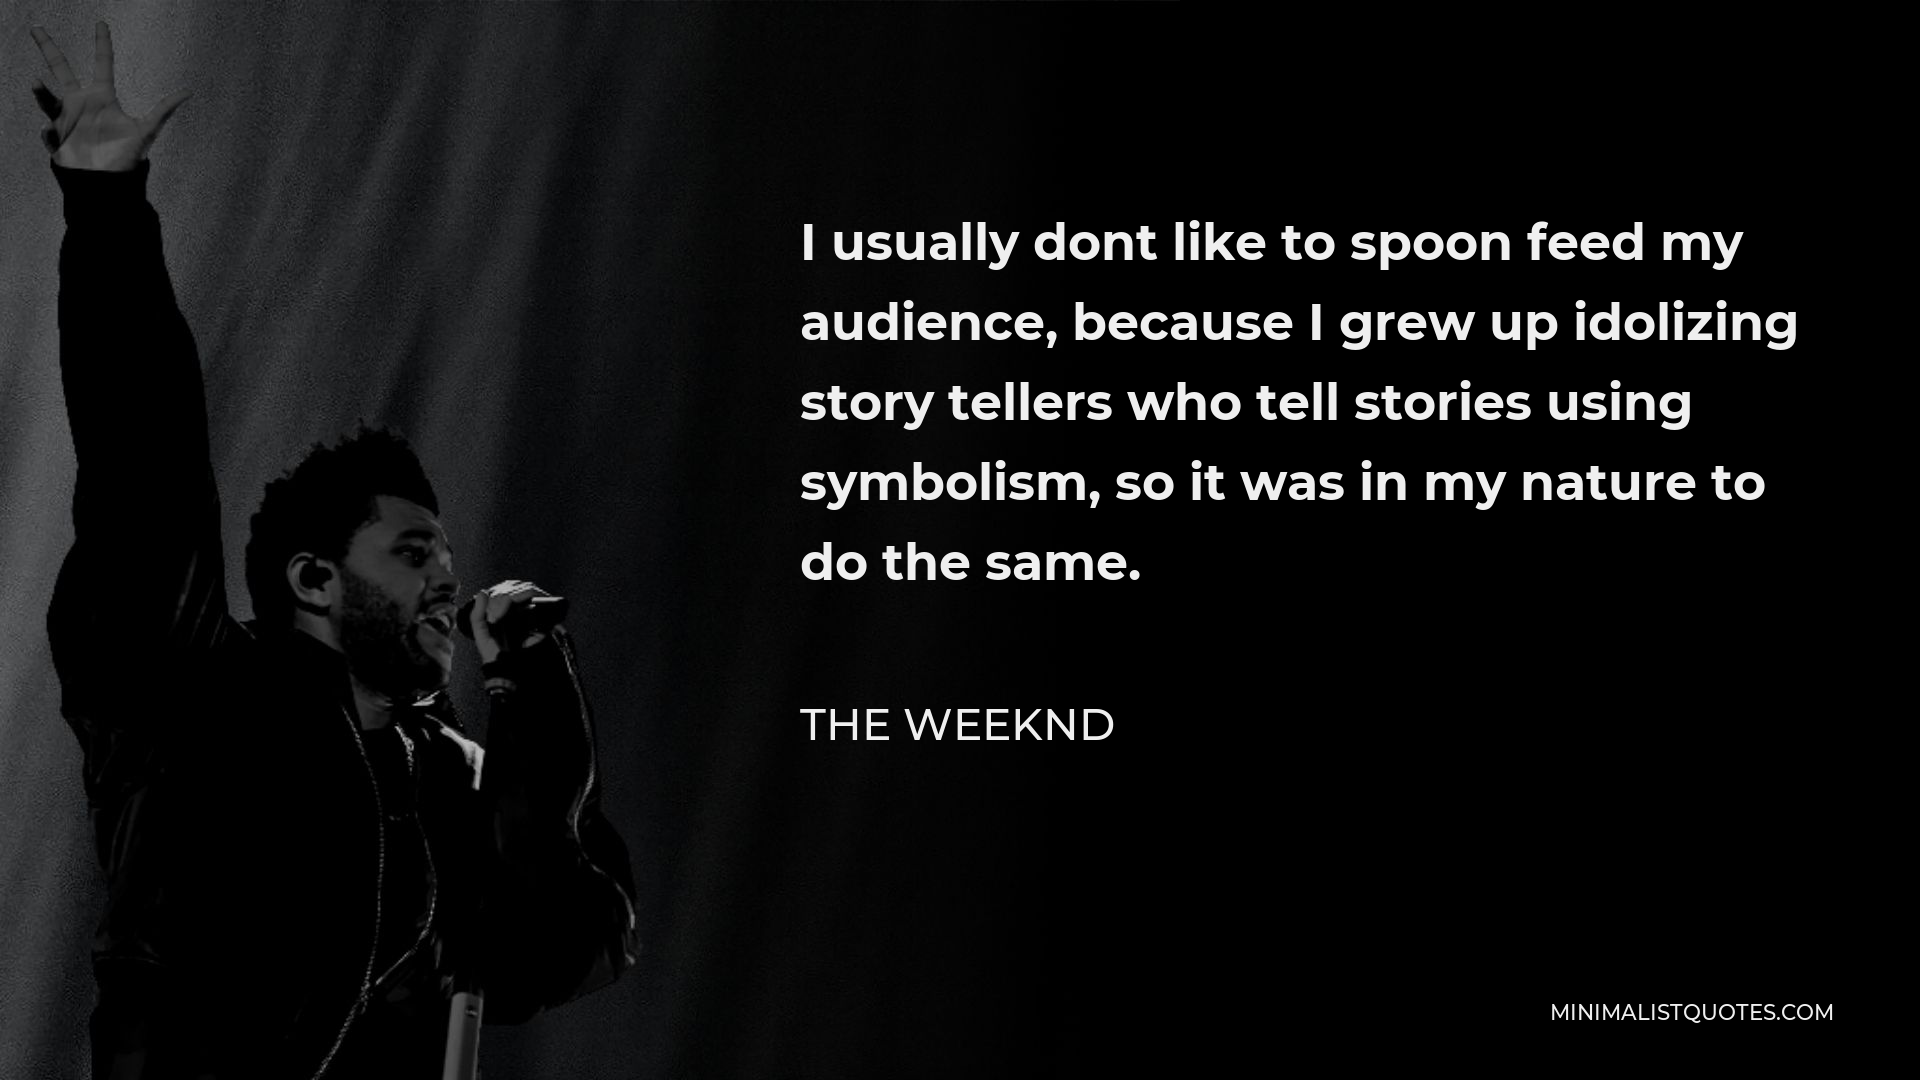 The Weeknd Quote - I usually dont like to spoon feed my audience, because I grew up idolizing story tellers who tell stories using symbolism, so it was in my nature to do the same.